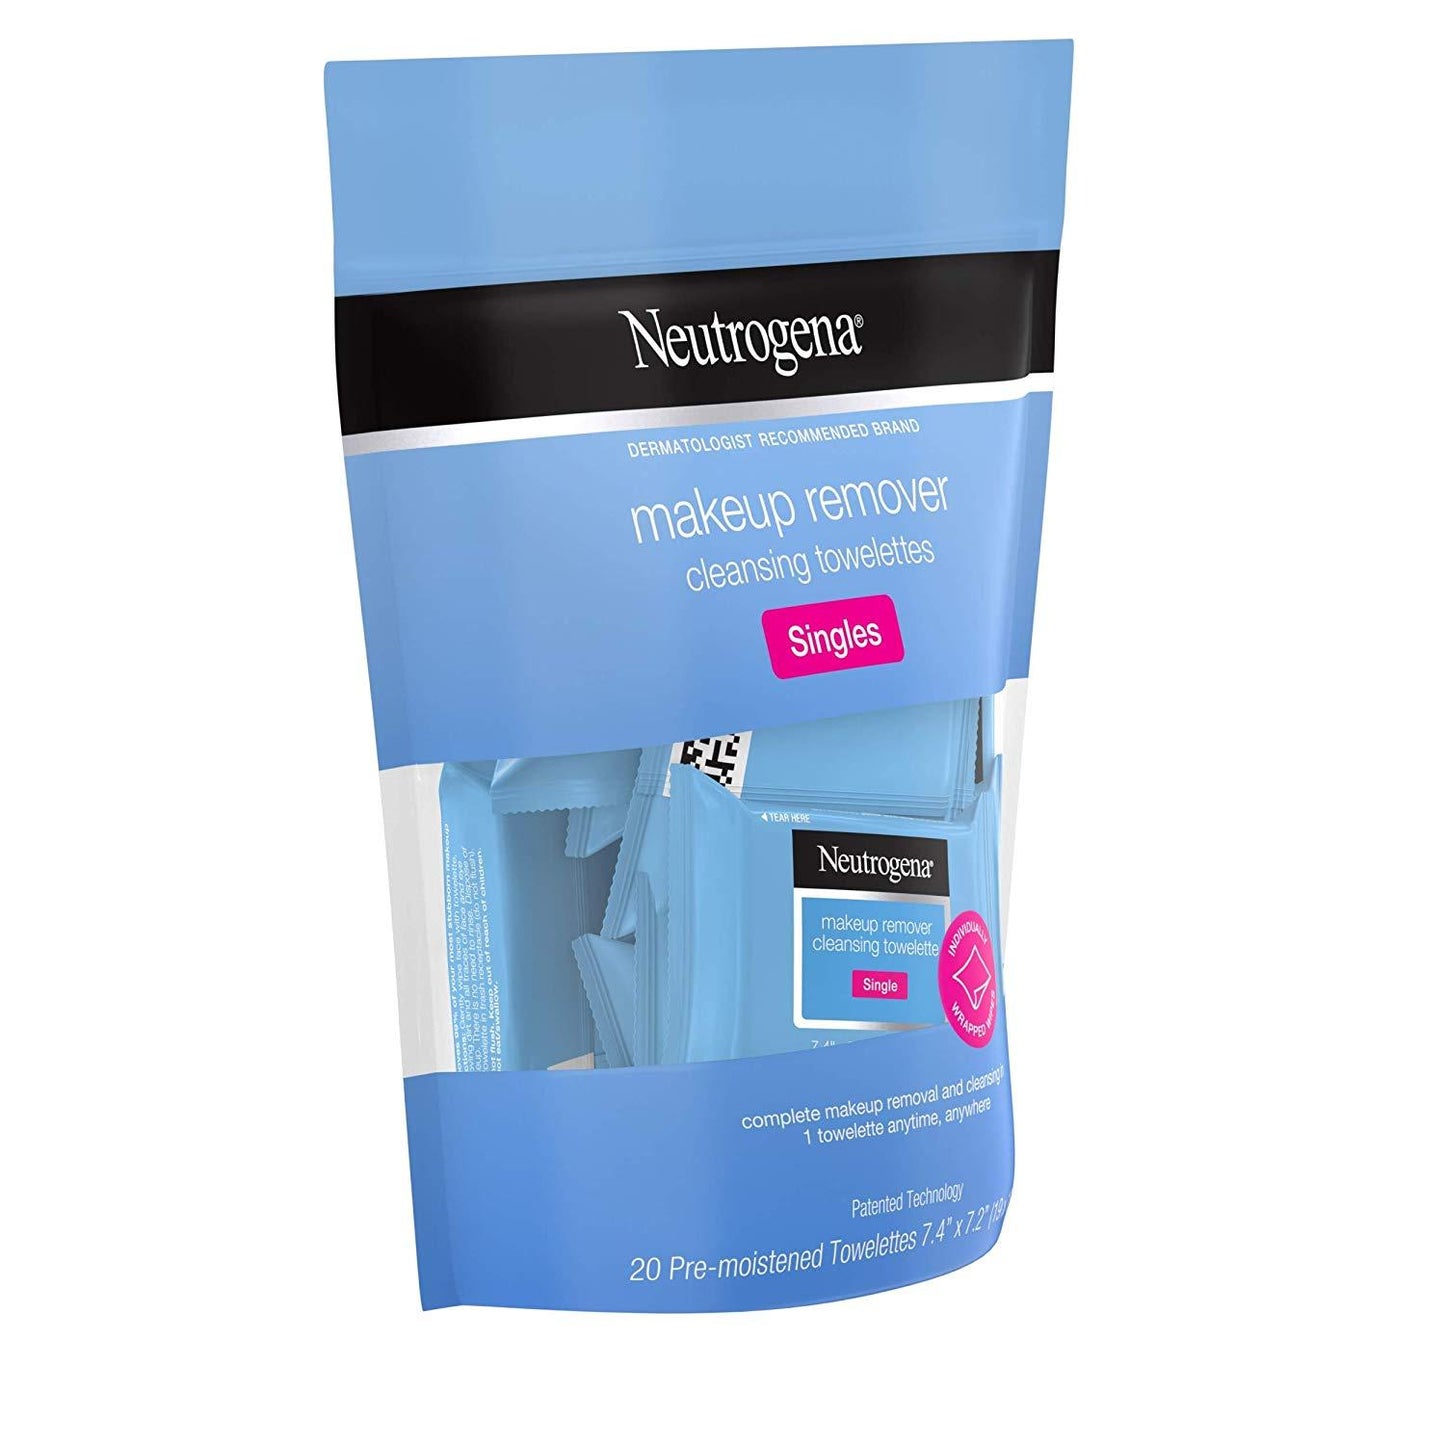 Neutrogena Makeup Remover Cleansing Towelette Singles, Daily Face Wipes To Remove Dirt, Oil, Makeup & Waterproof Mascara, Individually Wrapped, 20 Ct